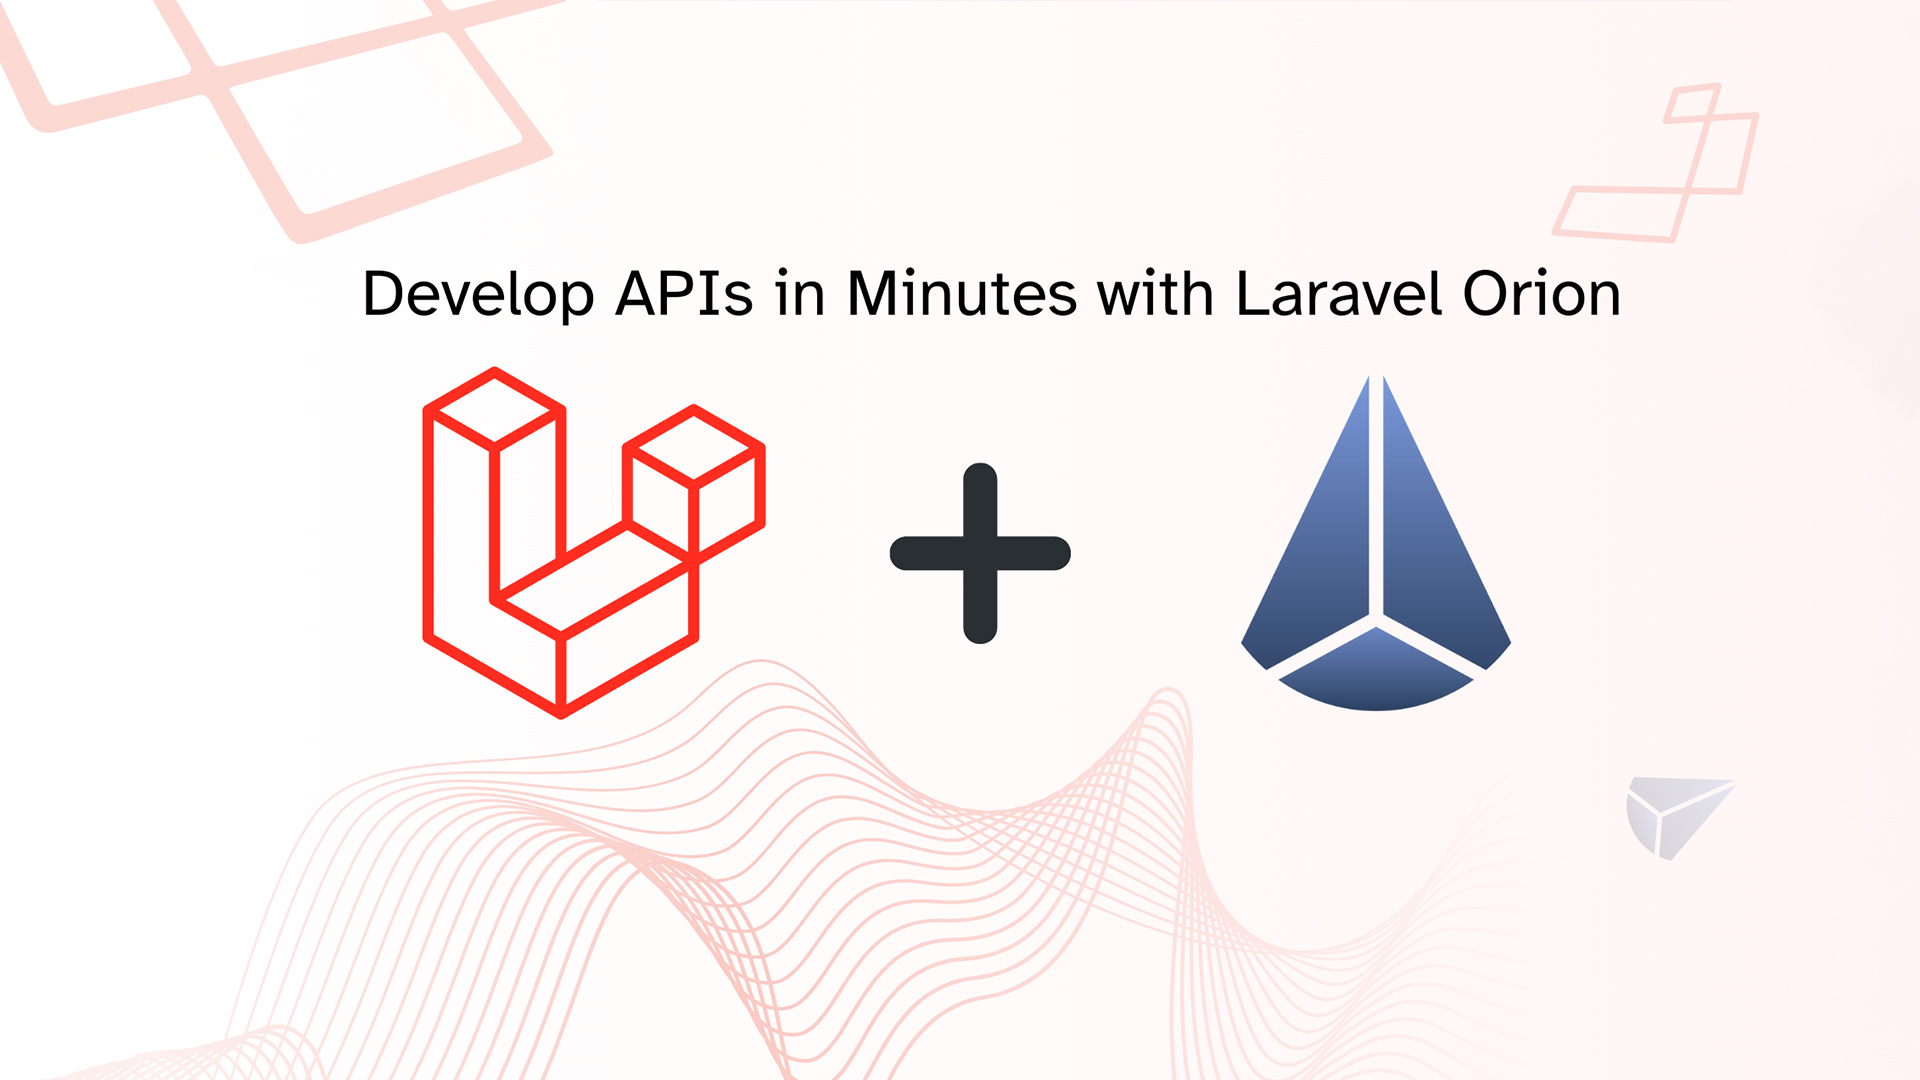 Develop APIs in Minutes with Laravel Orion